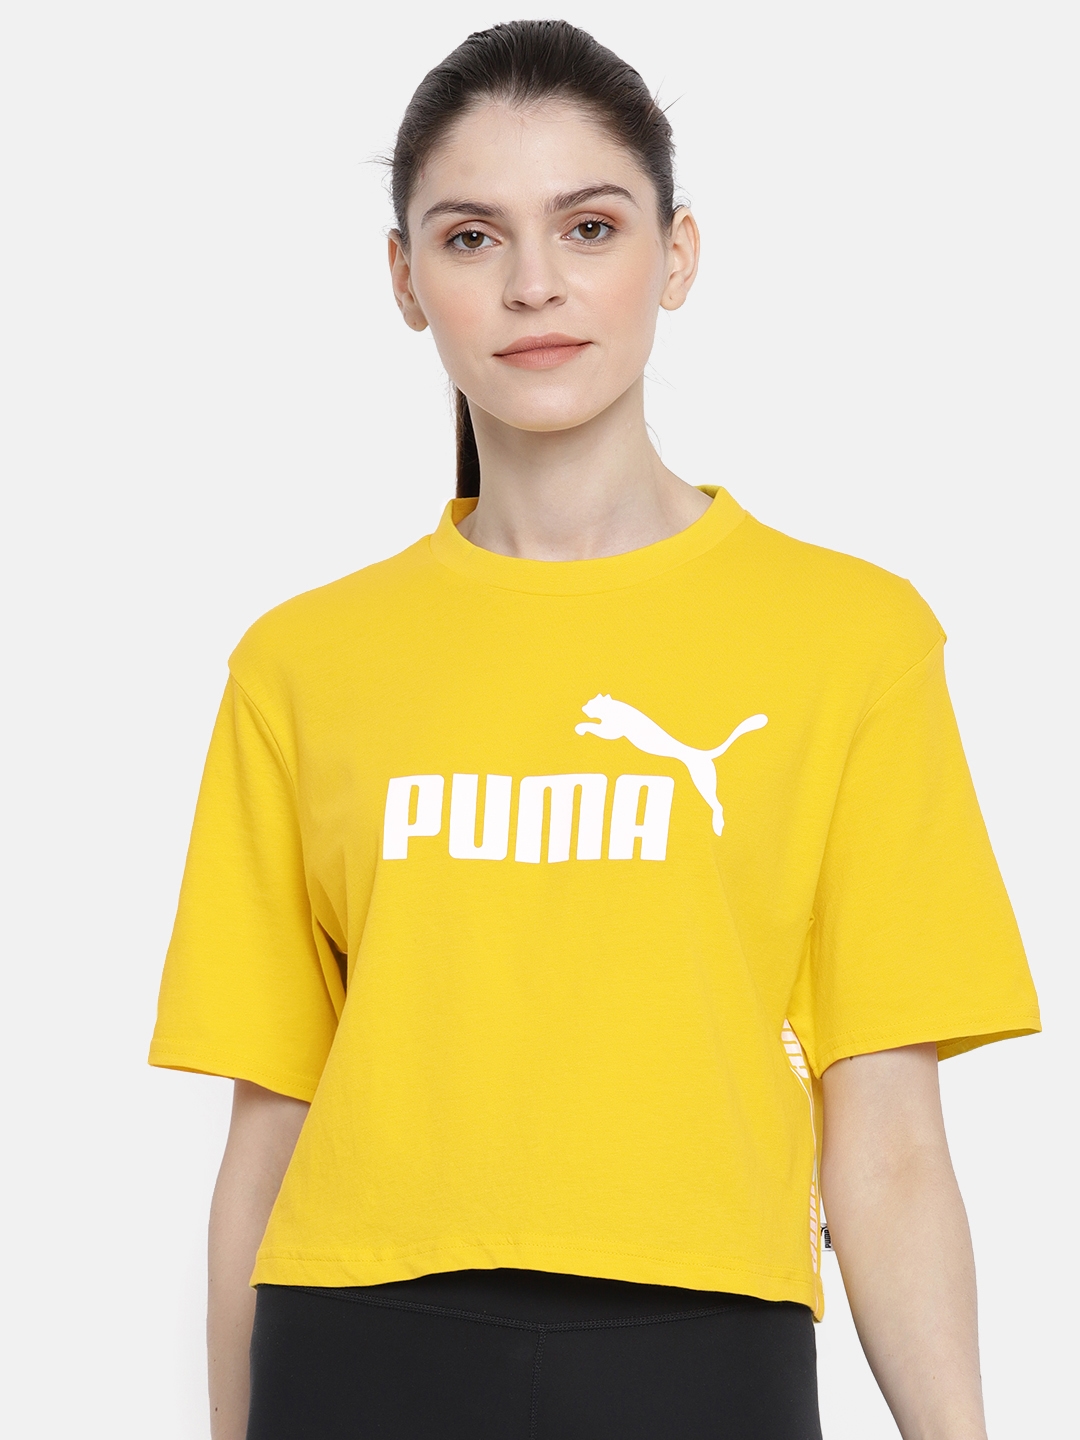 Buy Puma Women Yellow Relaxed Fit Printed Amplified Cropped Round Neck Boxy Pure T Shirt - for Women | Myntra